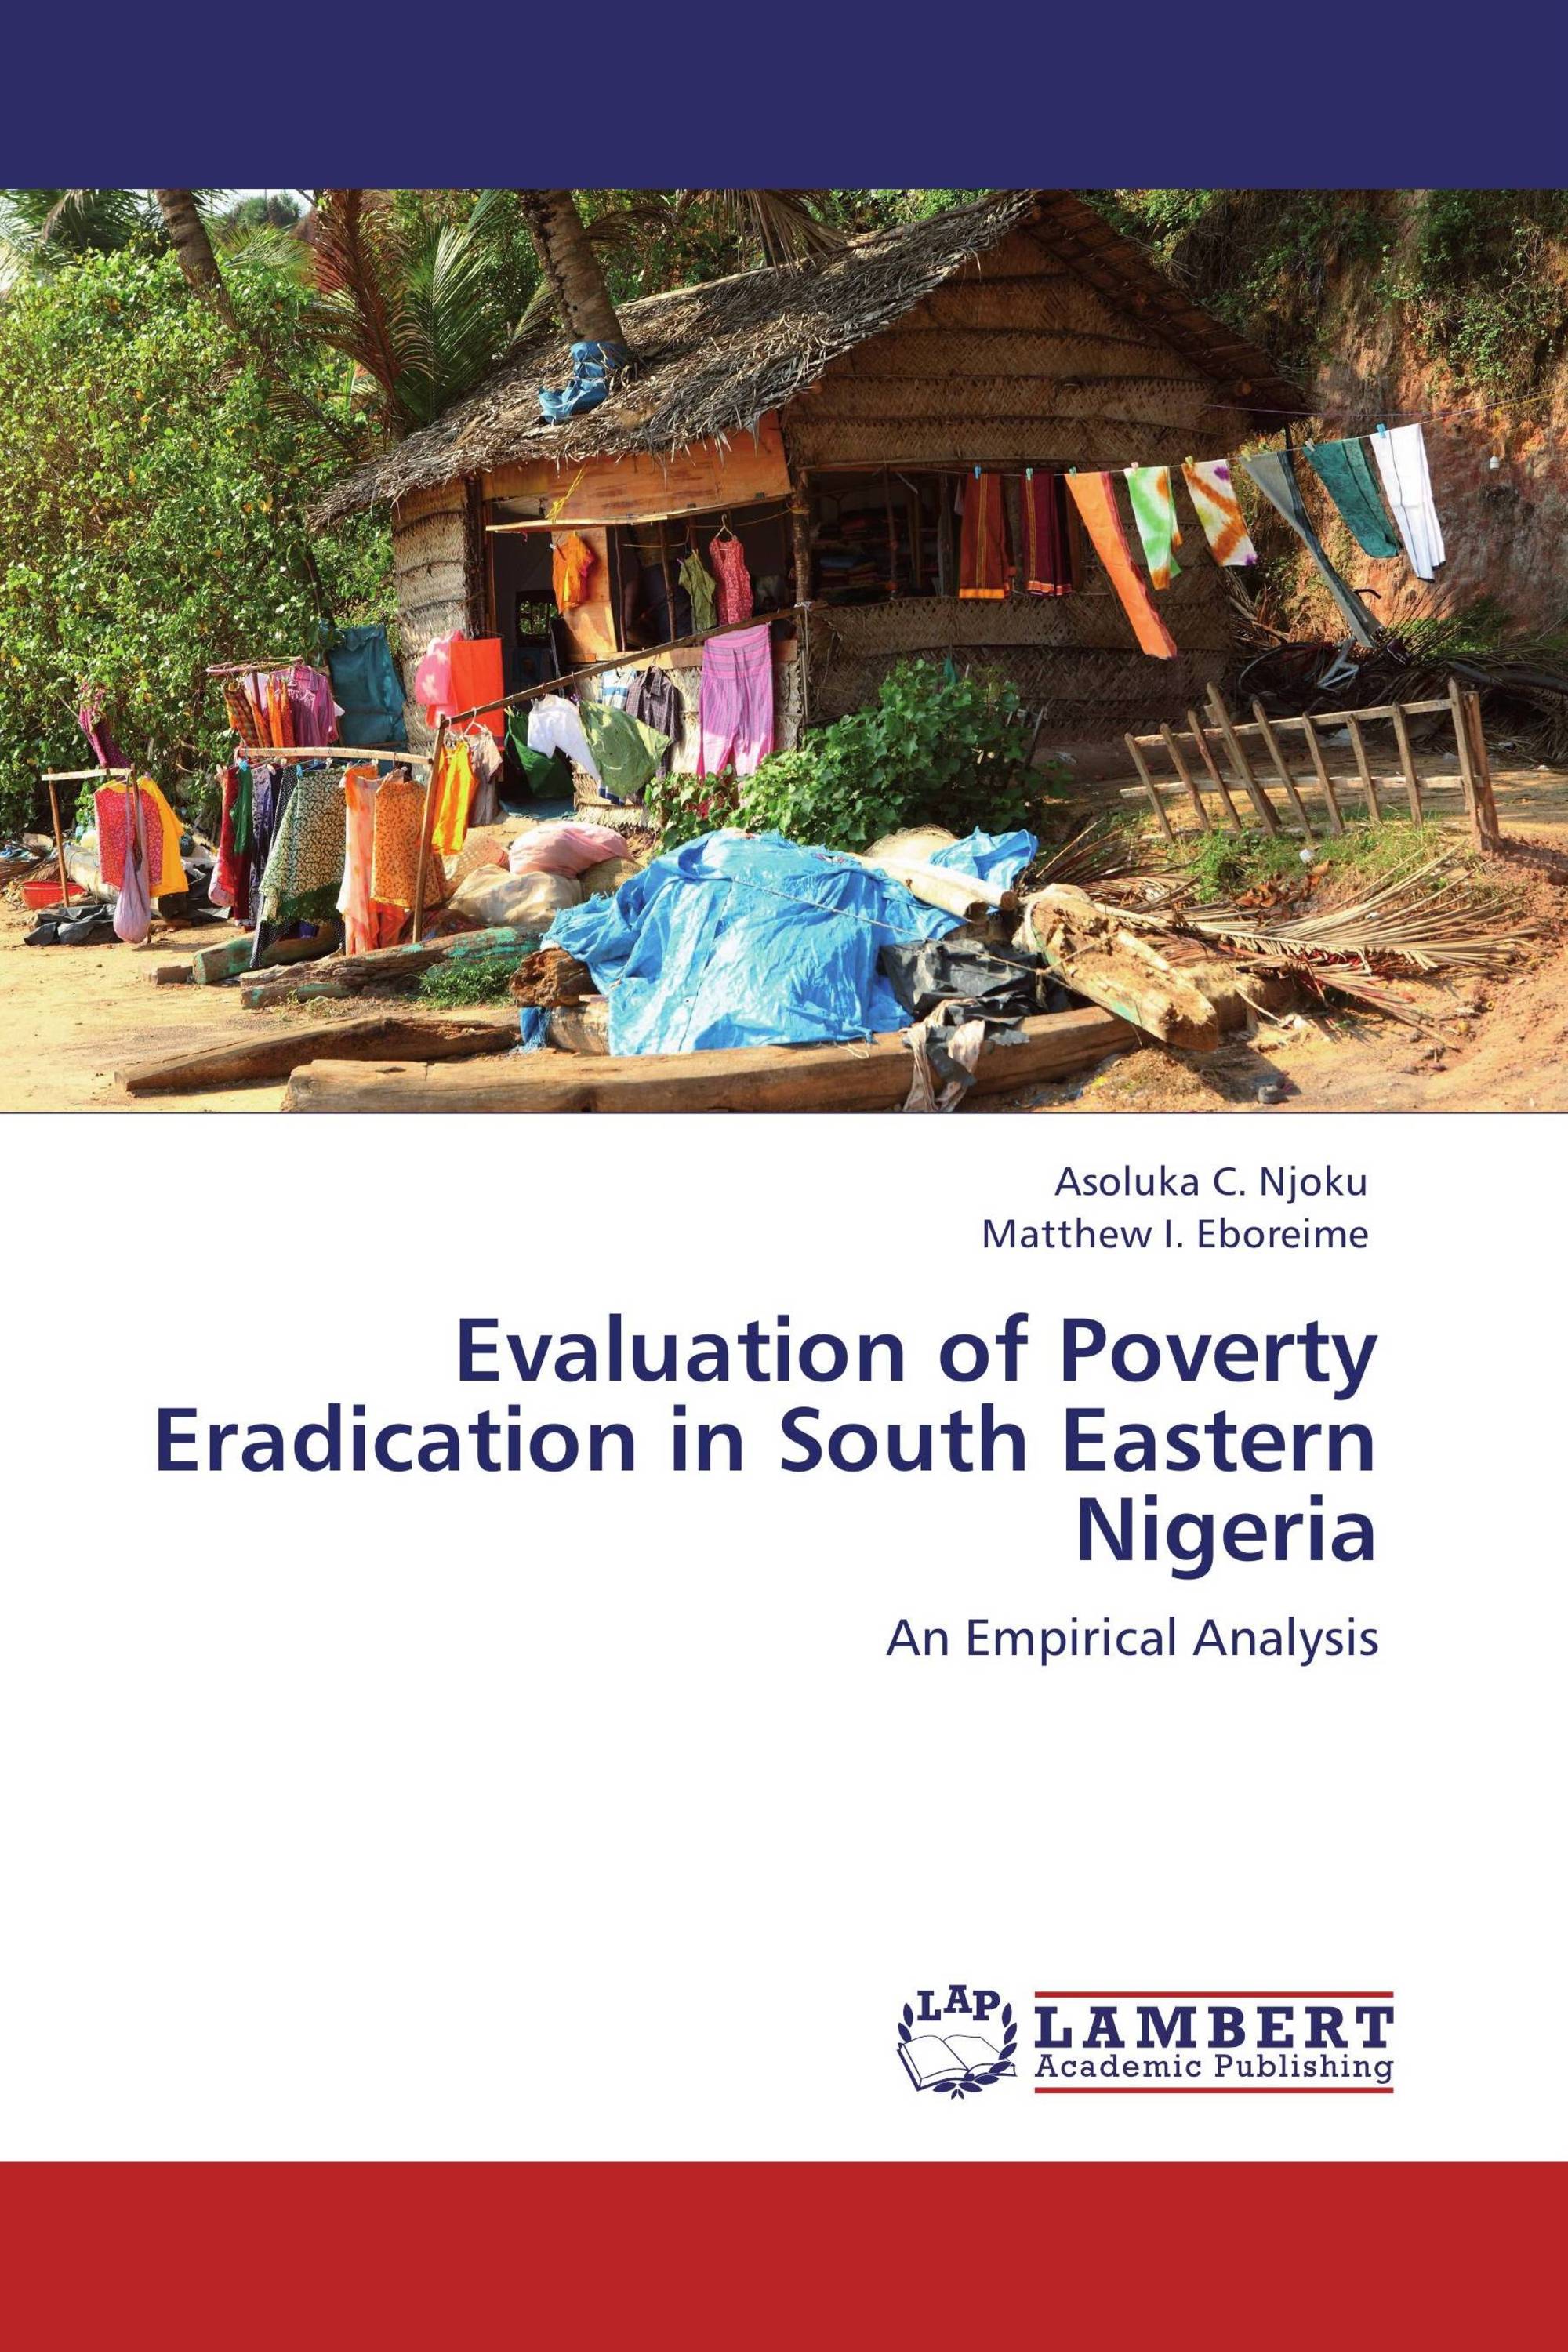 write an essay on poverty in nigeria